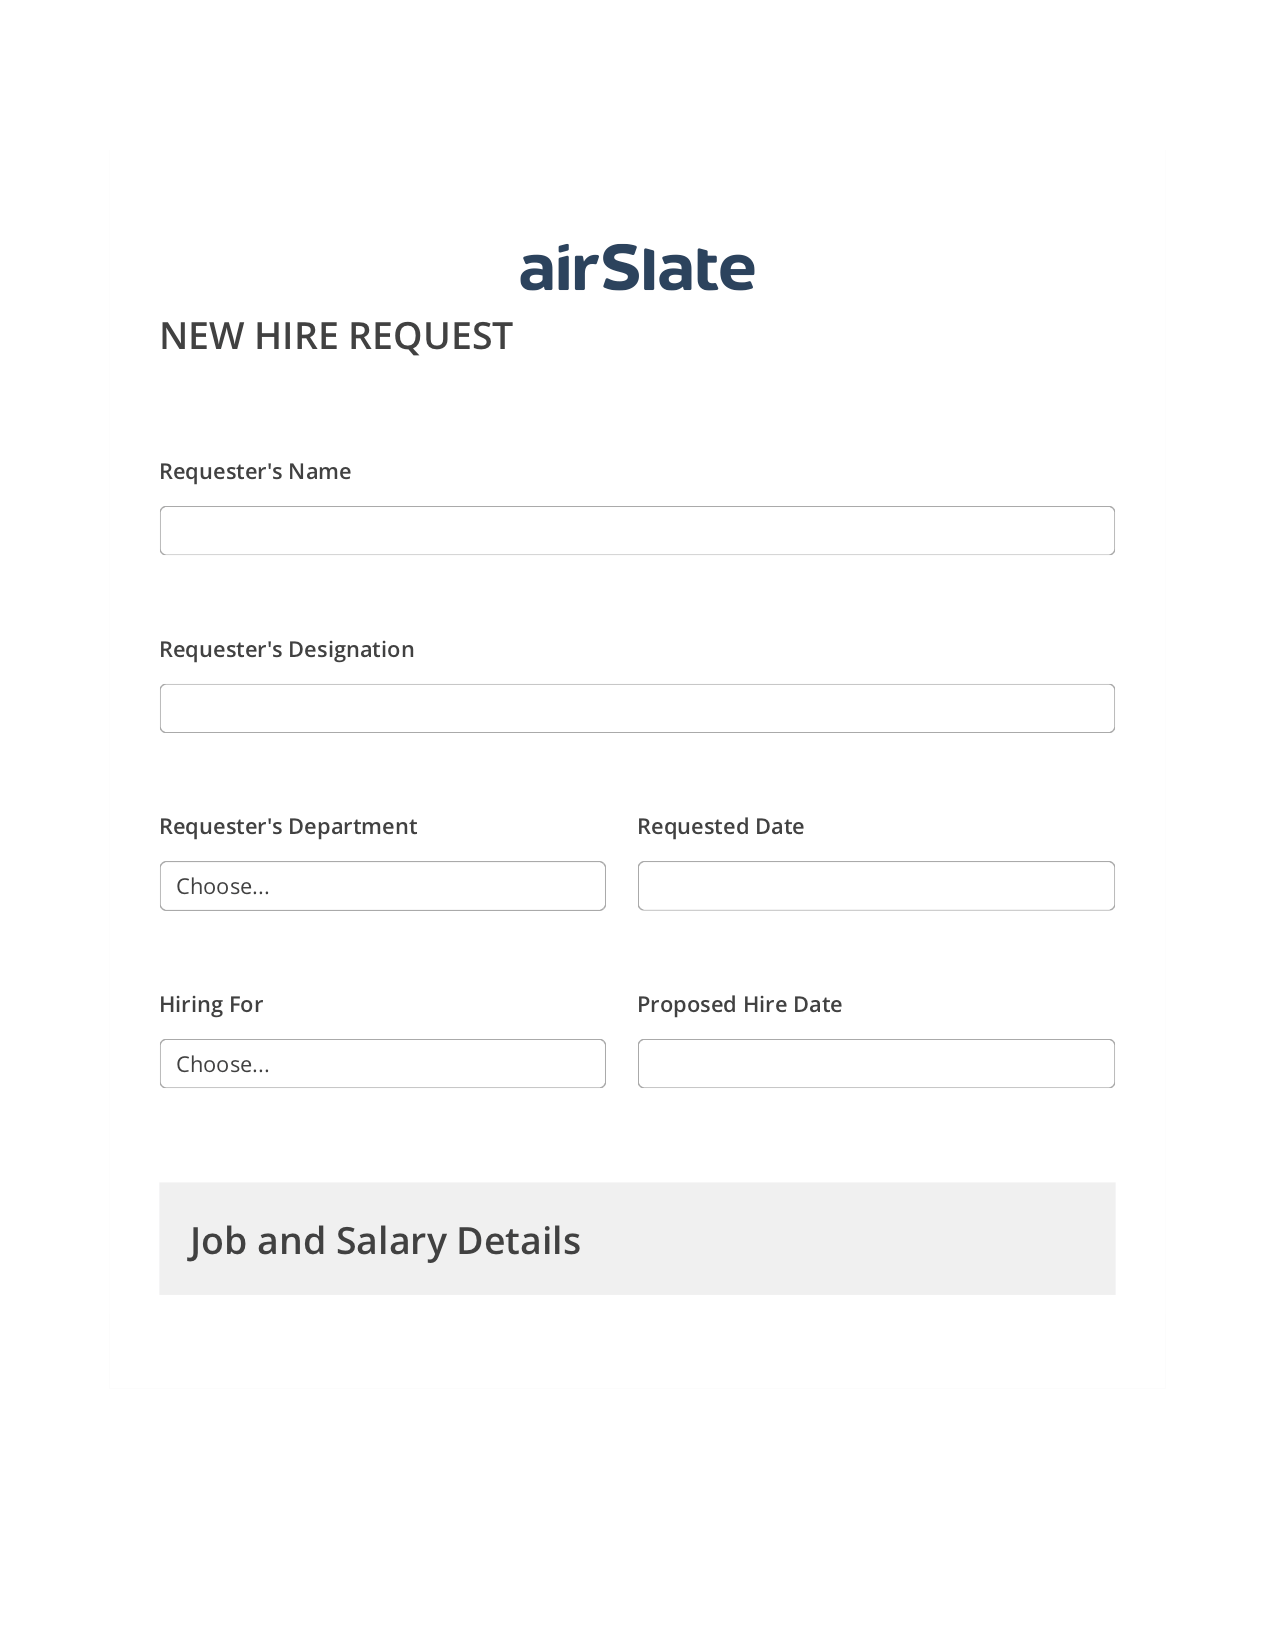 Hiring Request Workflow Pre-fill from Salesforce Records Bot, Jira Bot, Archive to OneDrive Bot